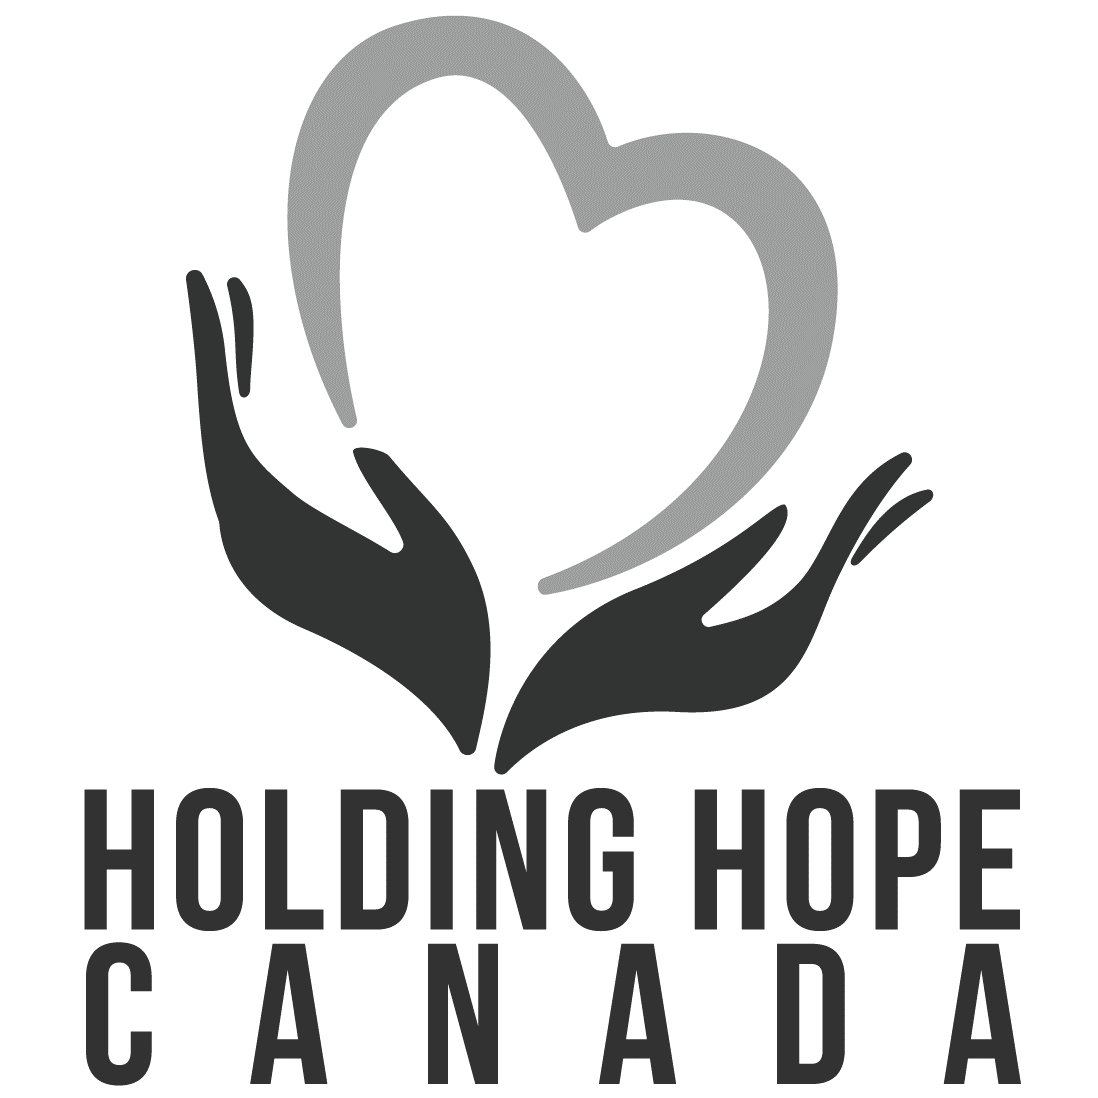 An illustration of two hands holding a heart for Holding Hope Canada.